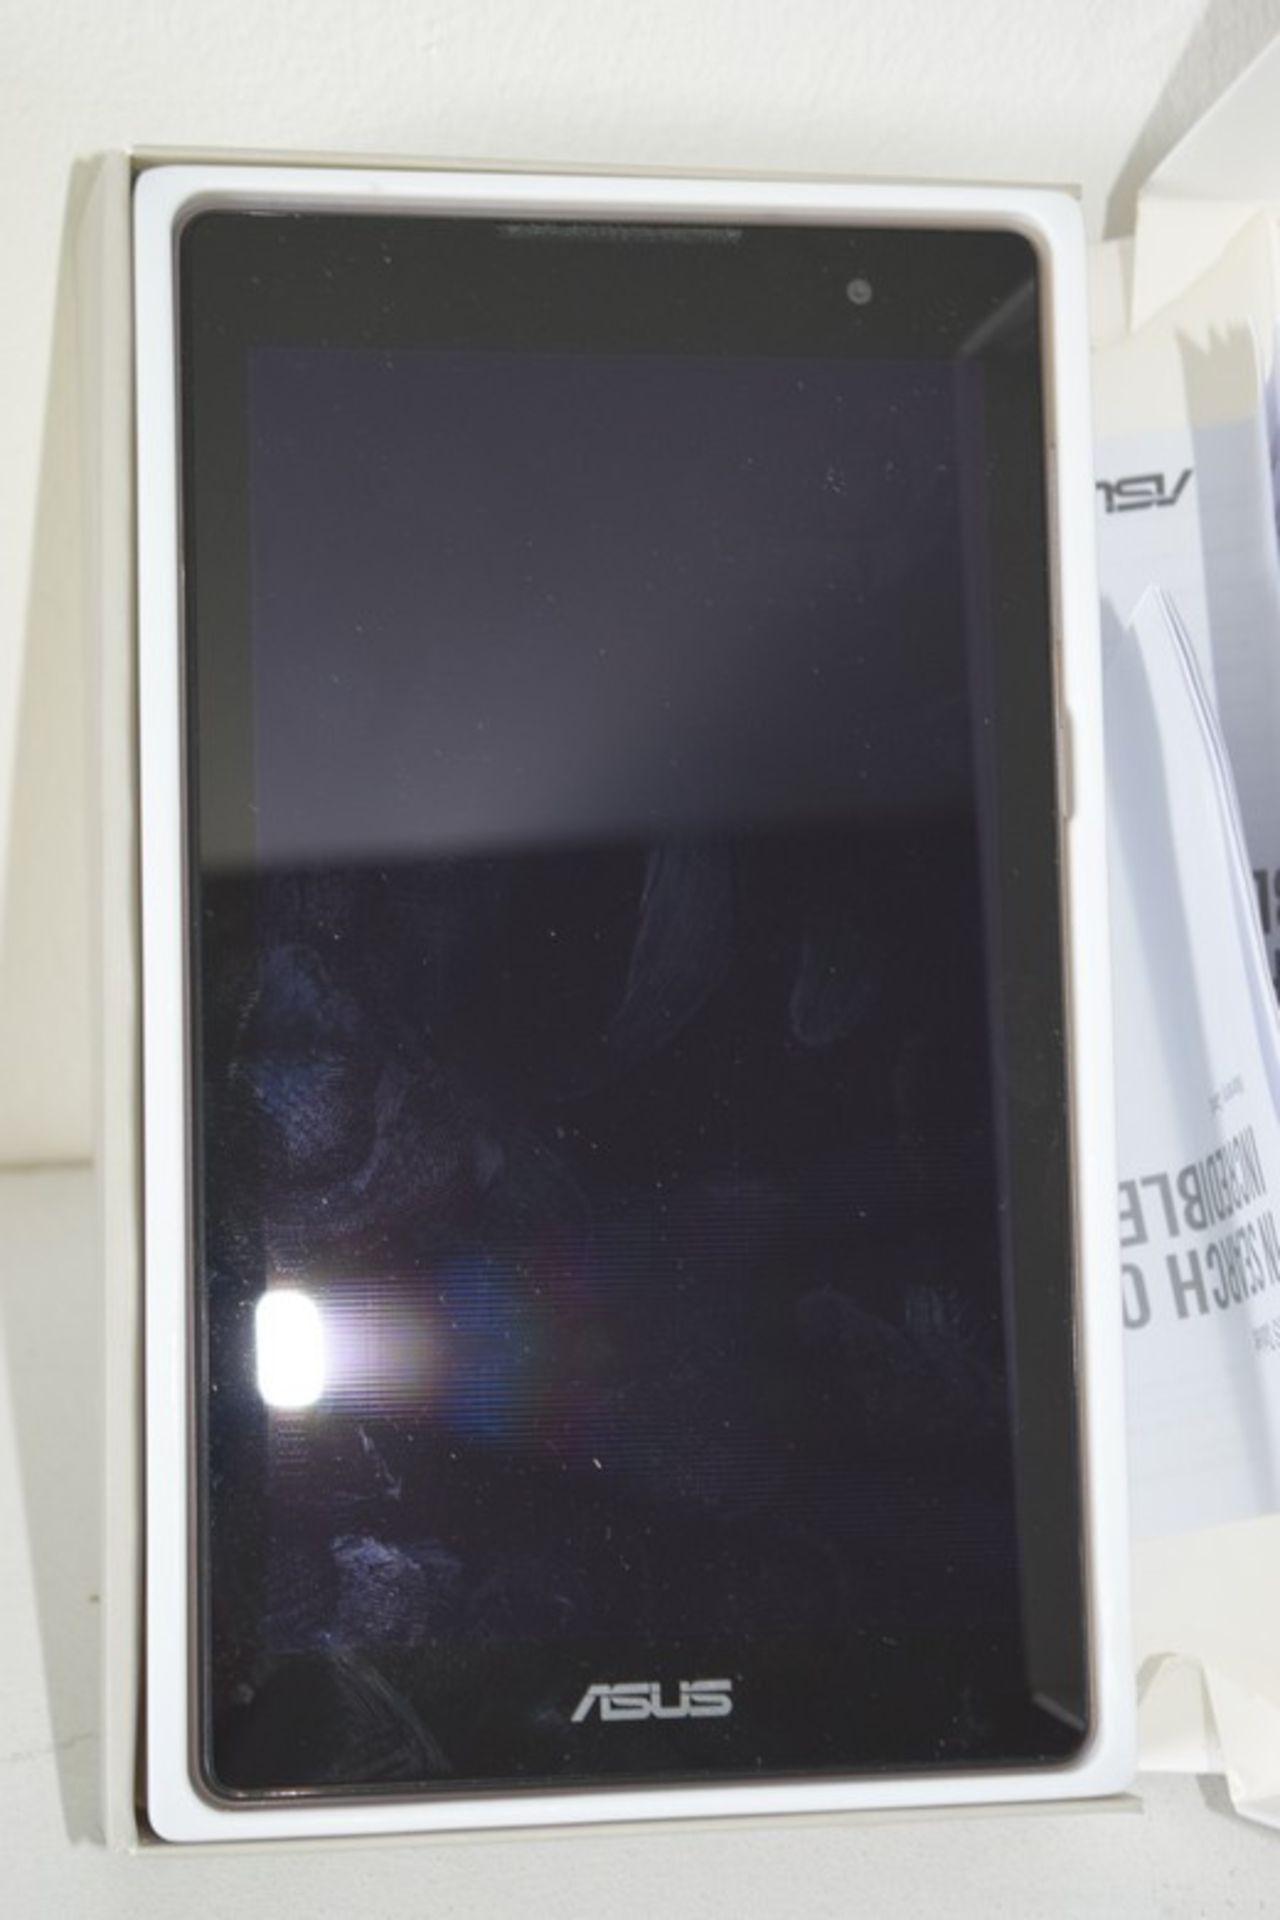 1 x BOXED ASUS ZENPAD C 7.0 TABLET RRP £80 PALLET (1502) (AC) *PLEASE NOTE THAT THE BID PRICE IS